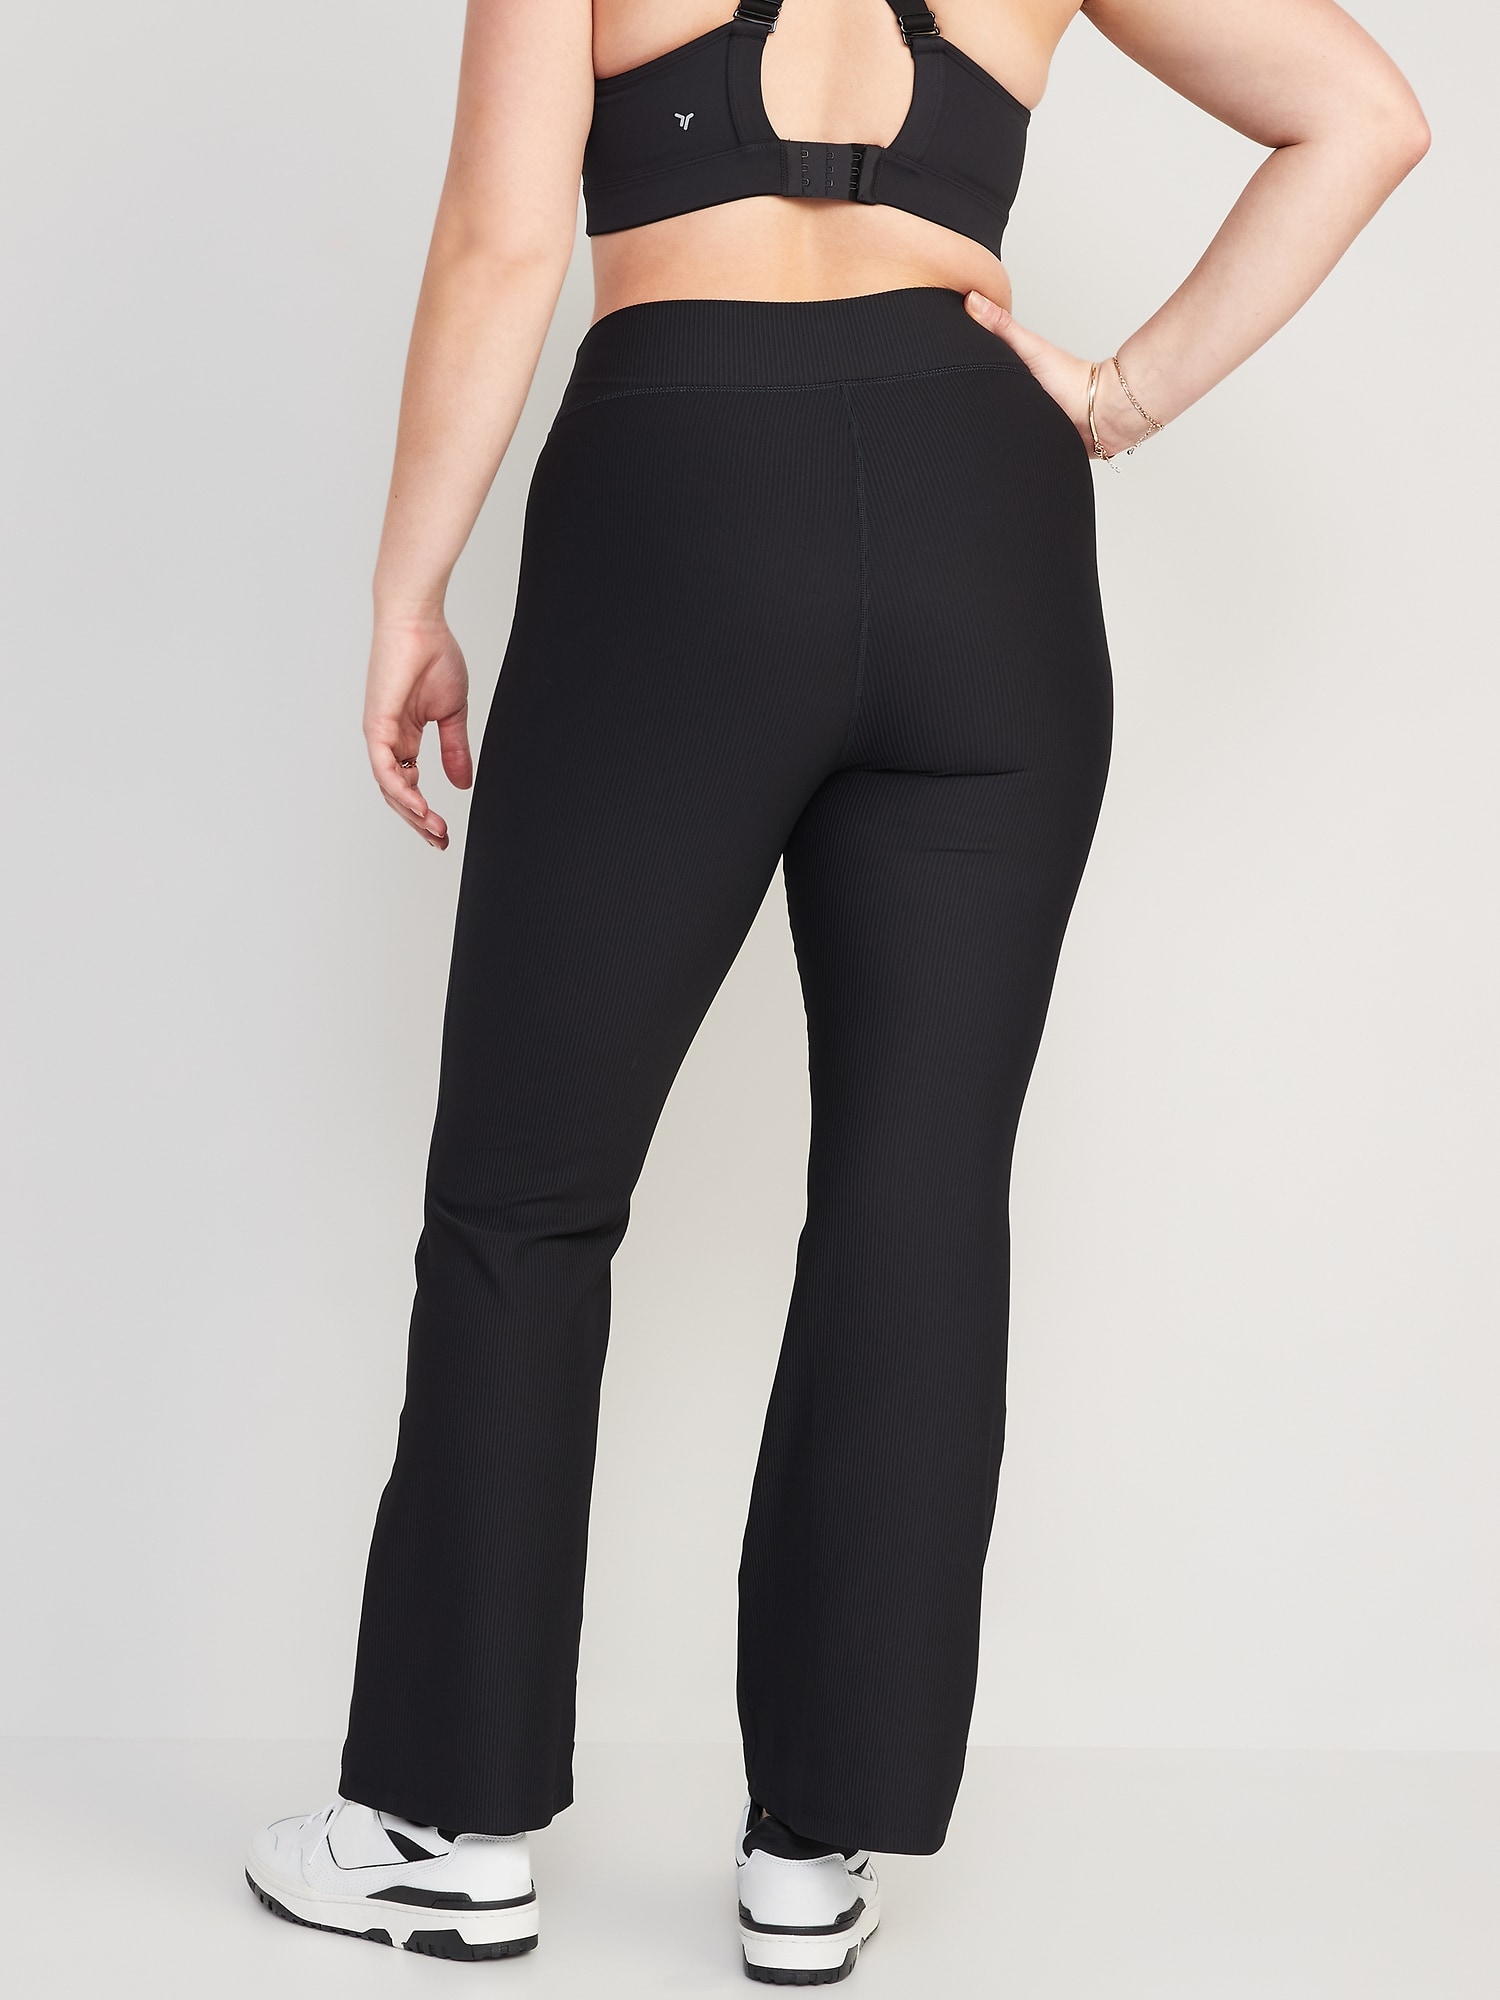  My Orders Placed Flare Leggings for Women Petite Tall